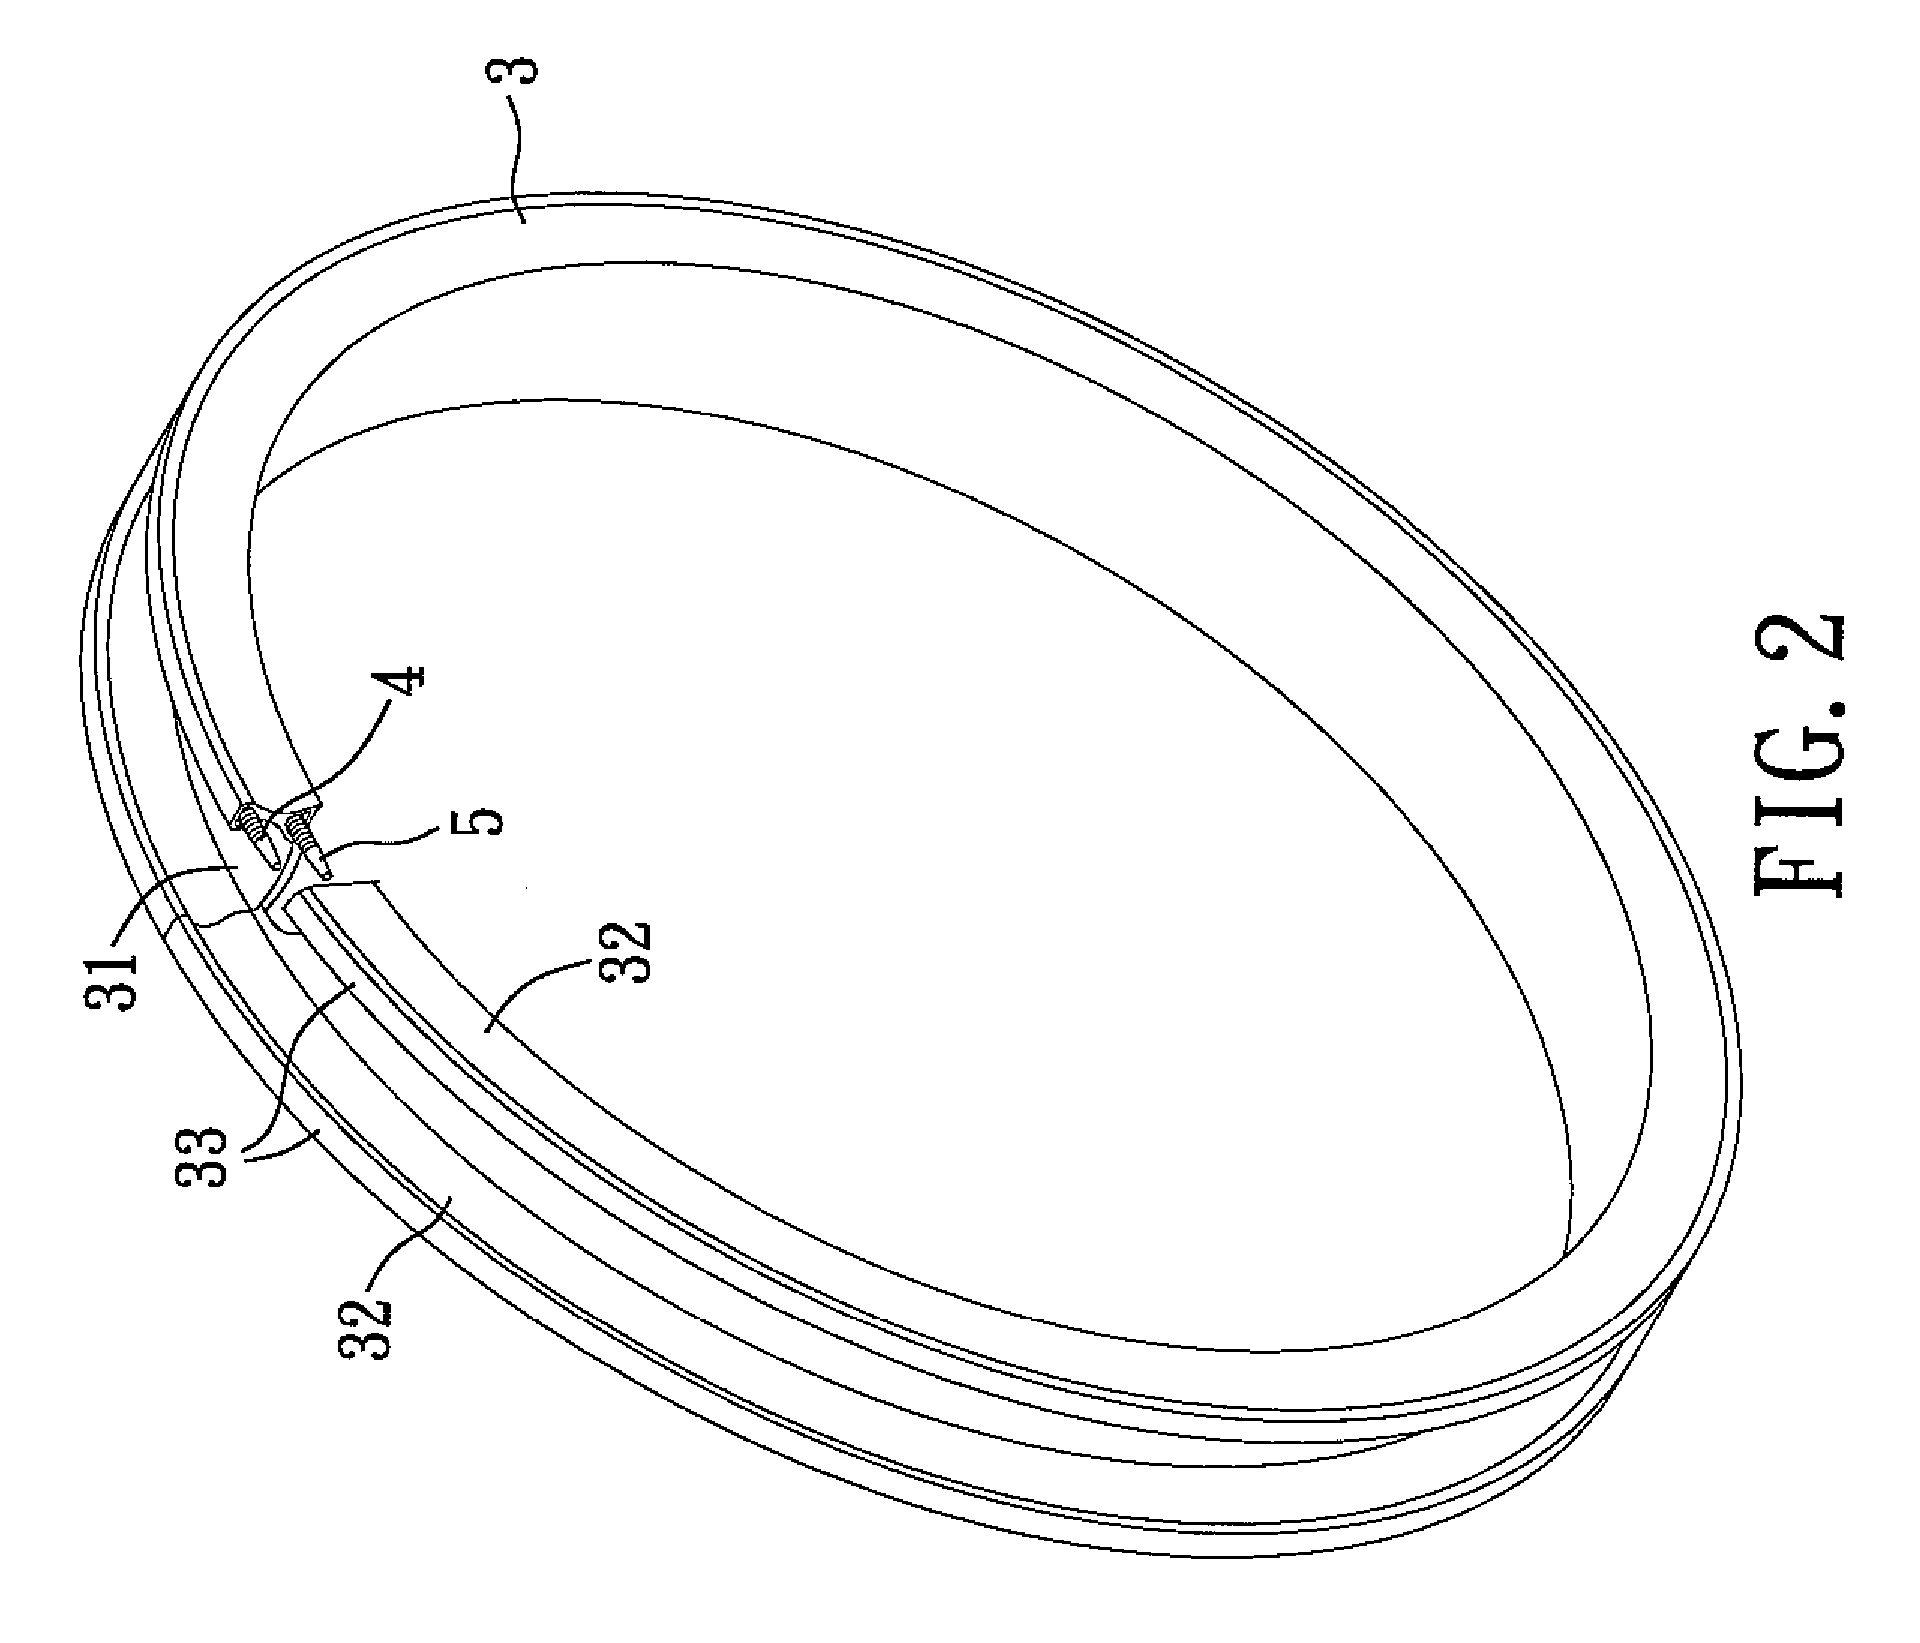 Wheel Rim with Hollow Flanges for Mounting of a Tire